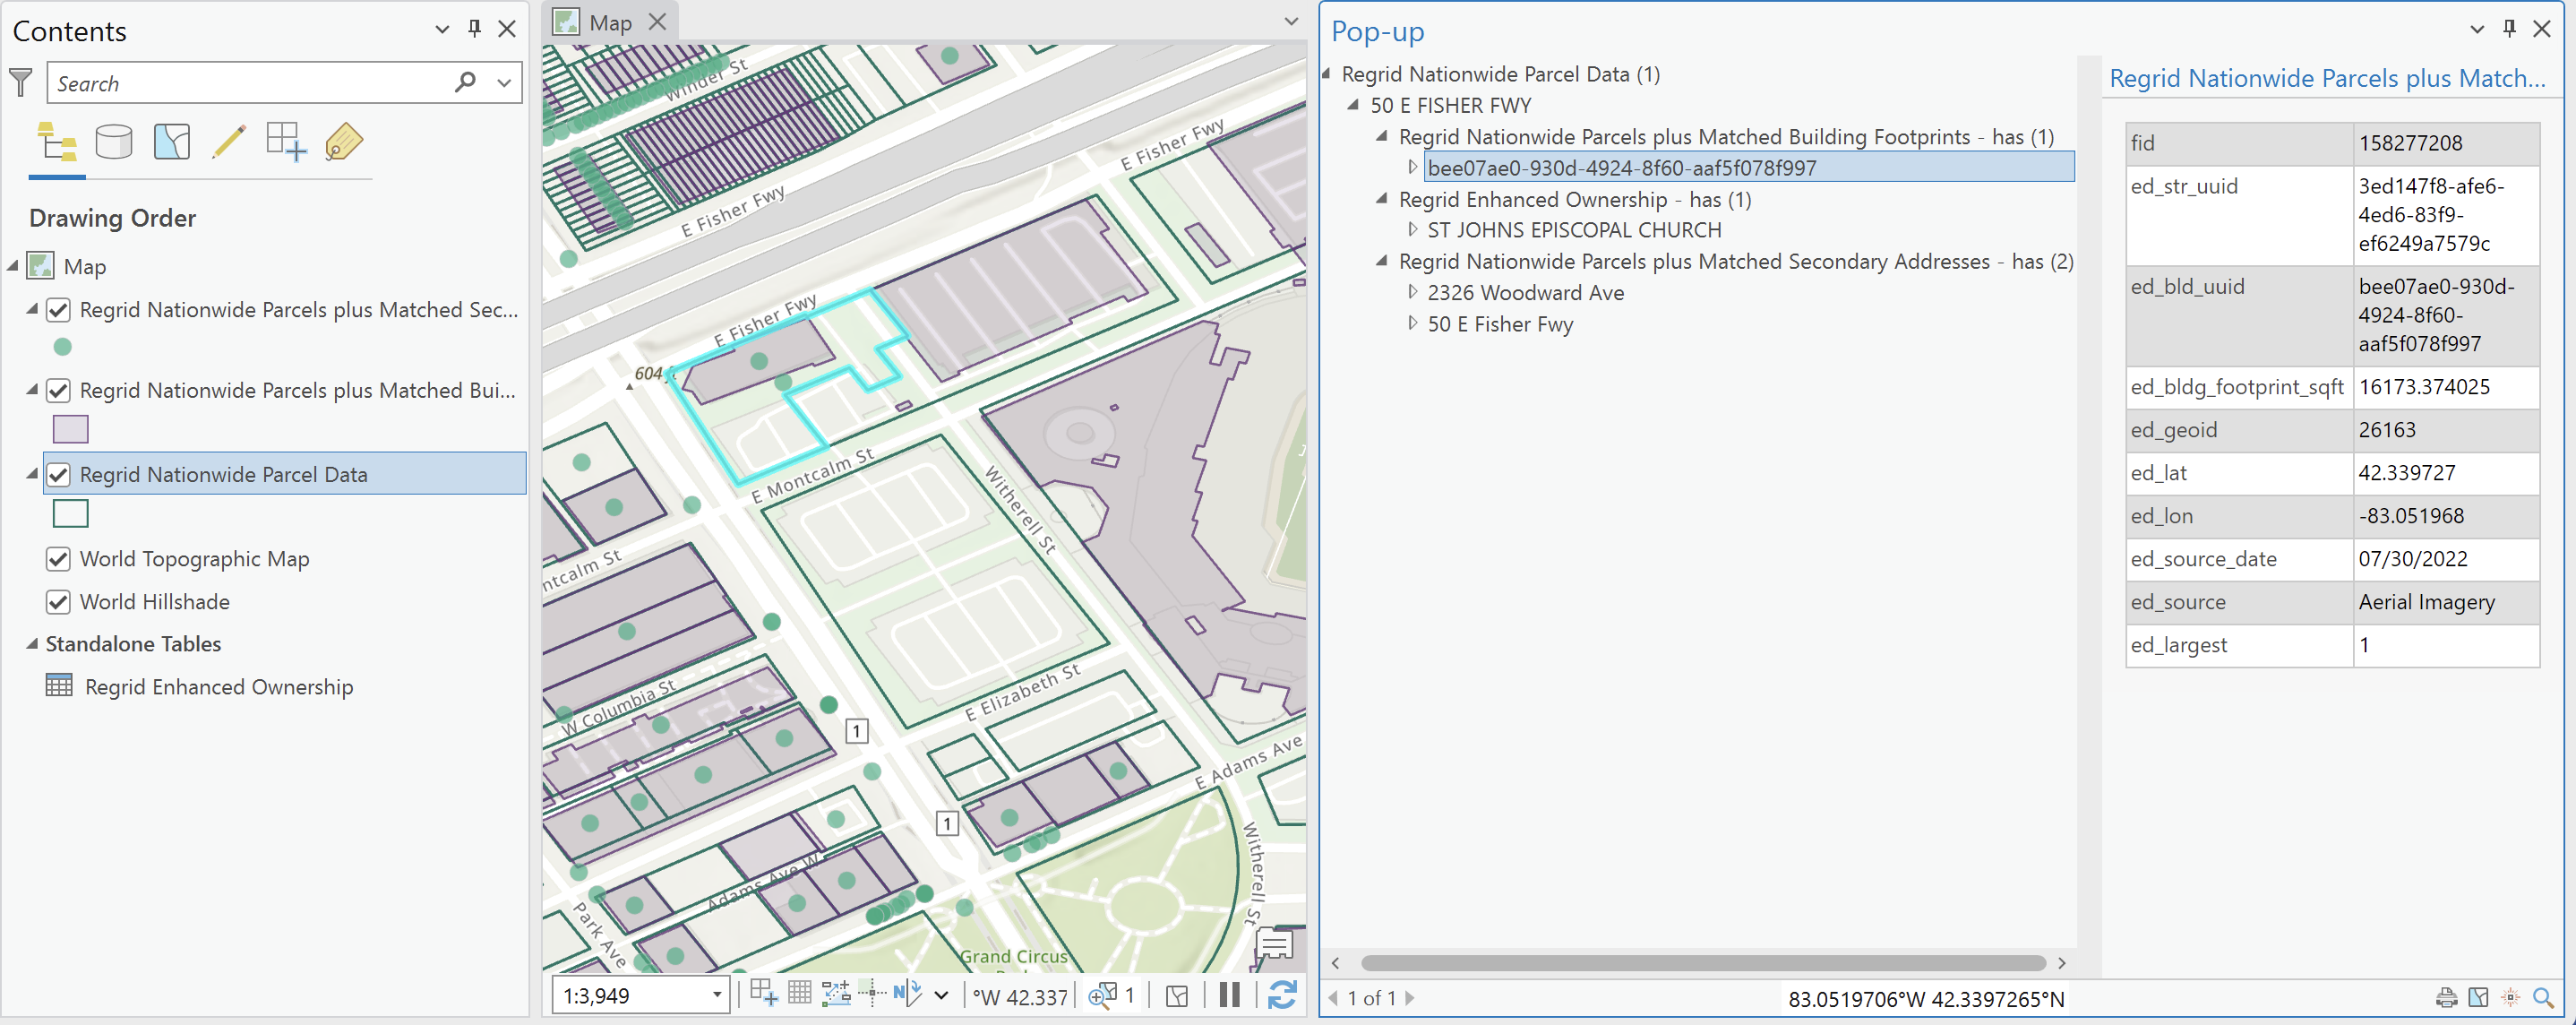 Accessing related records for a selected parcel in ArcGIS Pro via the Attributes Pane. The pane in the bottom-right, shows the details of one of the buildings on the parcel. This parcel's related records include one record in Enhanced Ownership and many from both Matched Building Footprints and Matched Secondary Addresses.